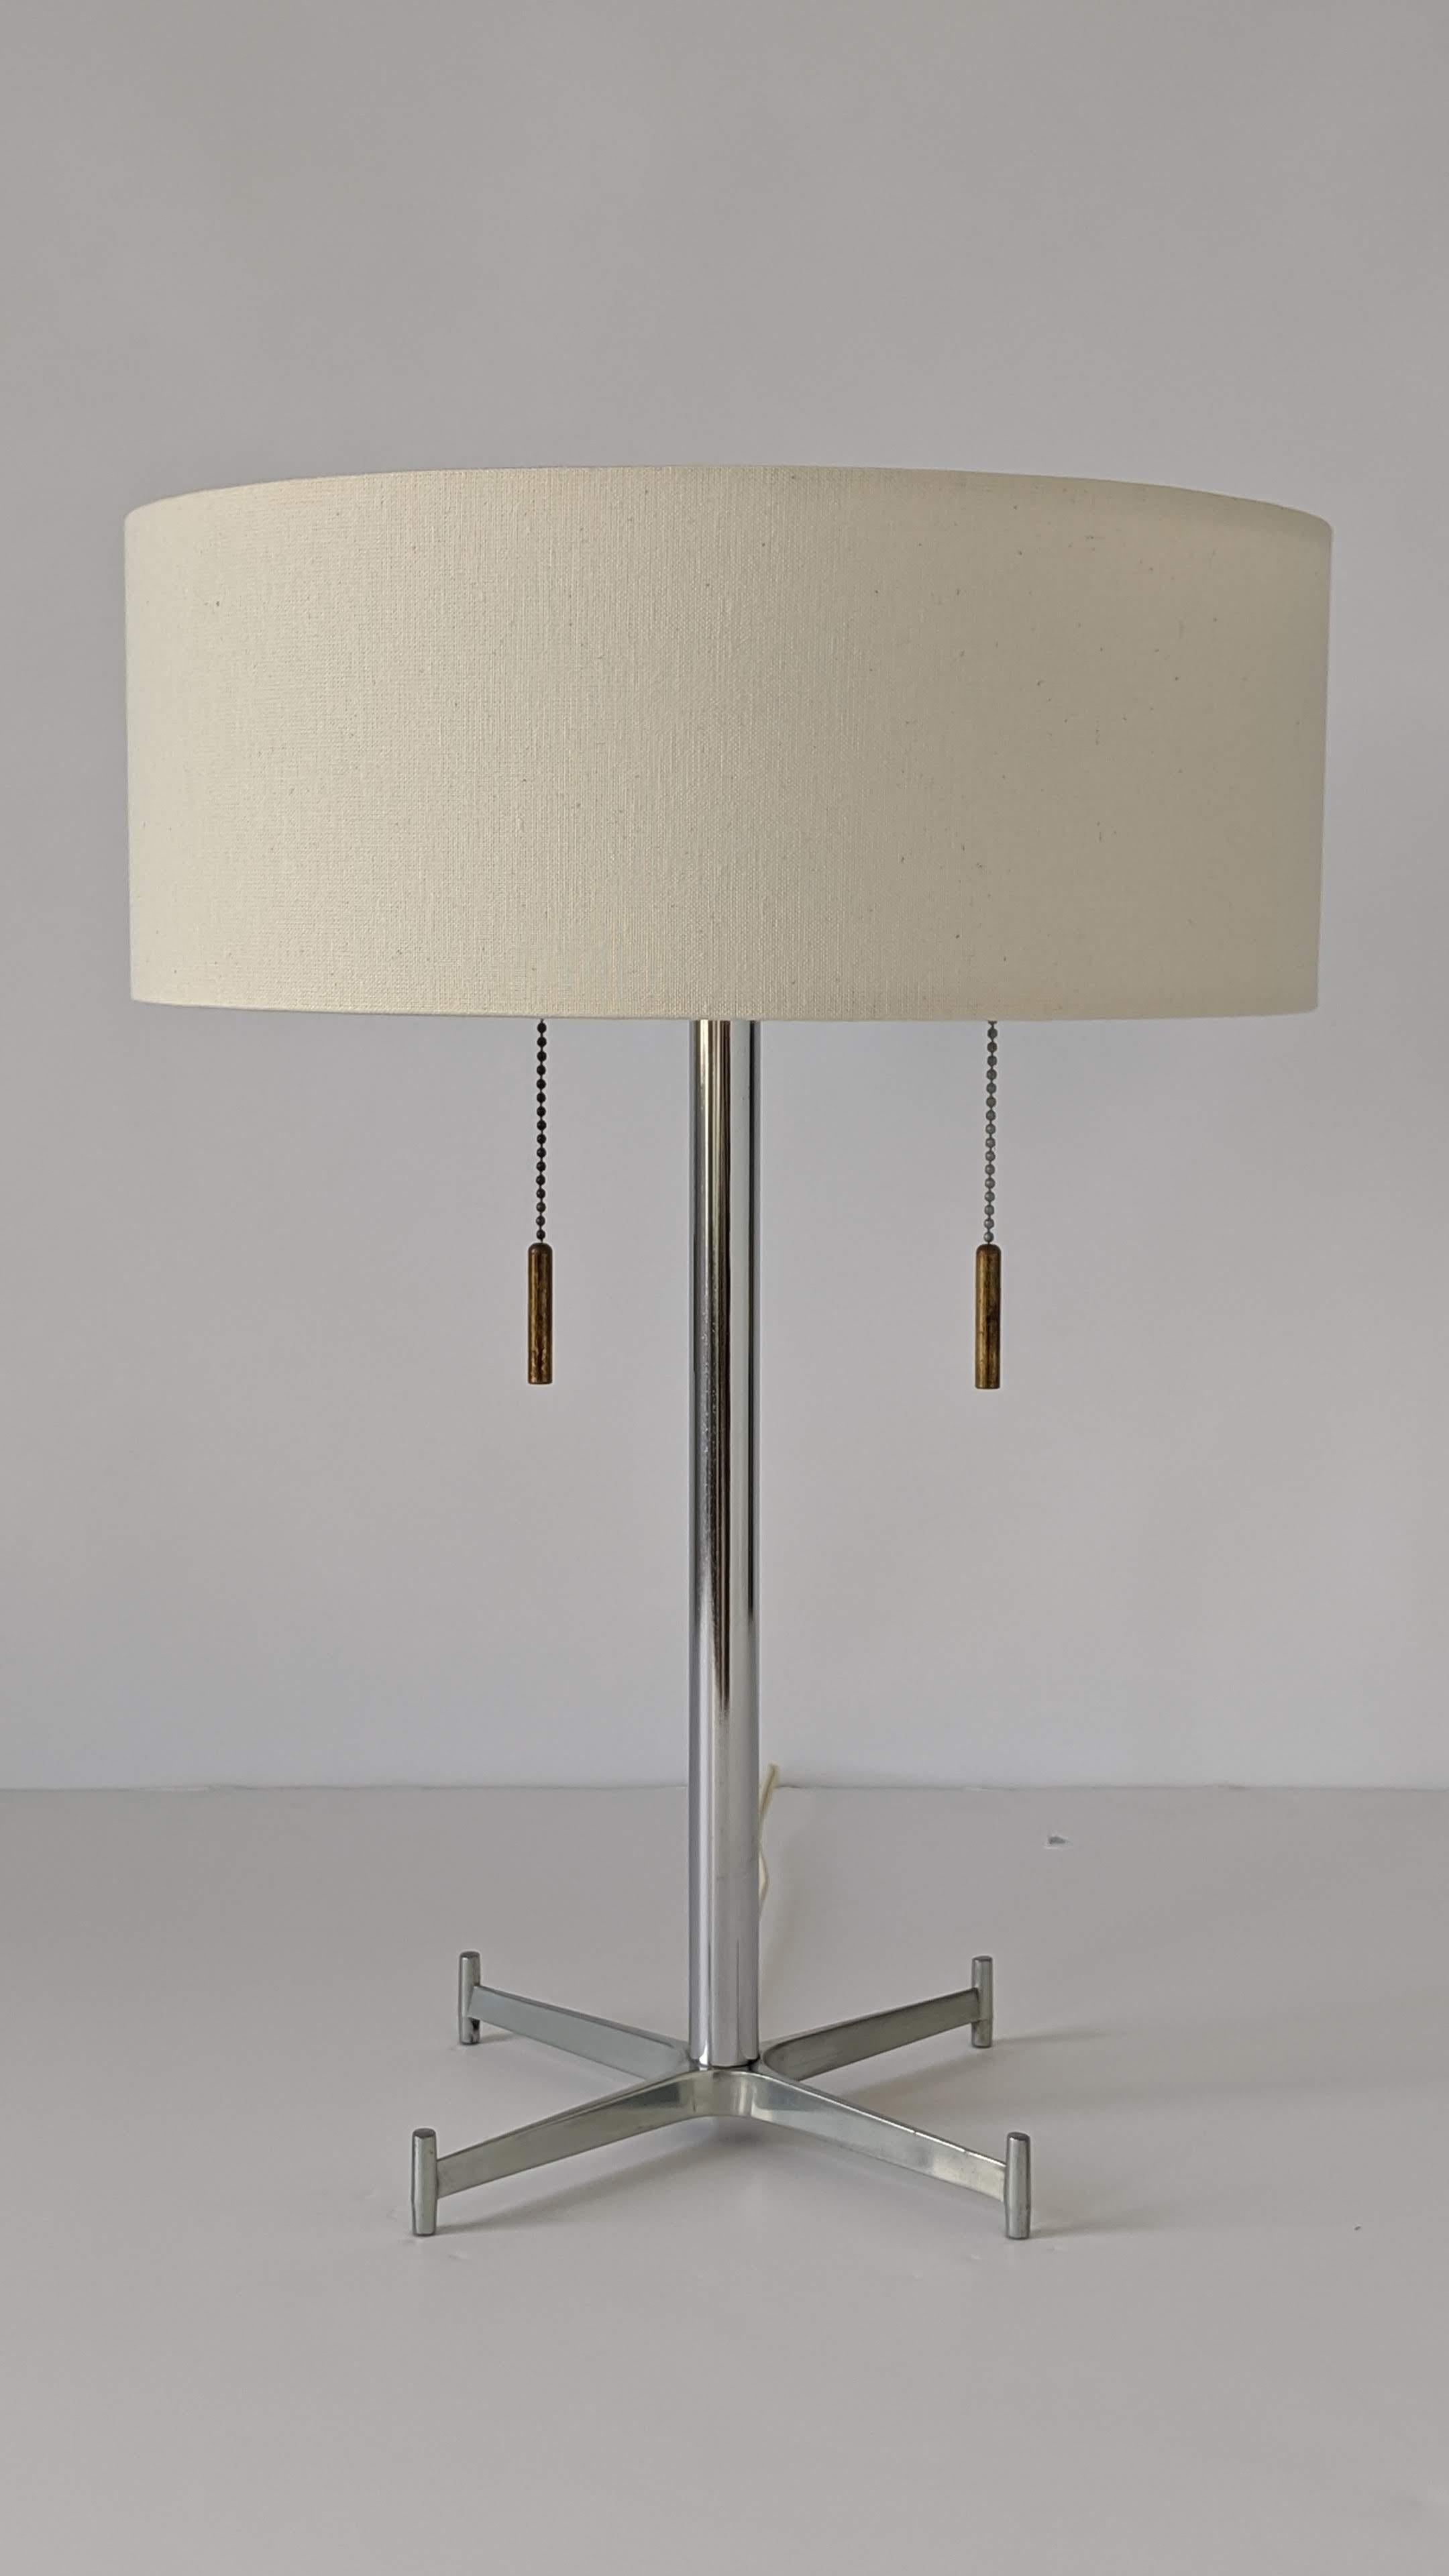 Minimalist modern table lamp from Gerald Thurston.

Well made solid construction.

Two E26 size socket rated at 60 watt with individual pull chain with easy to grab patinated thick brass hardware.

Enameled pierced diffuser on top.

Casted